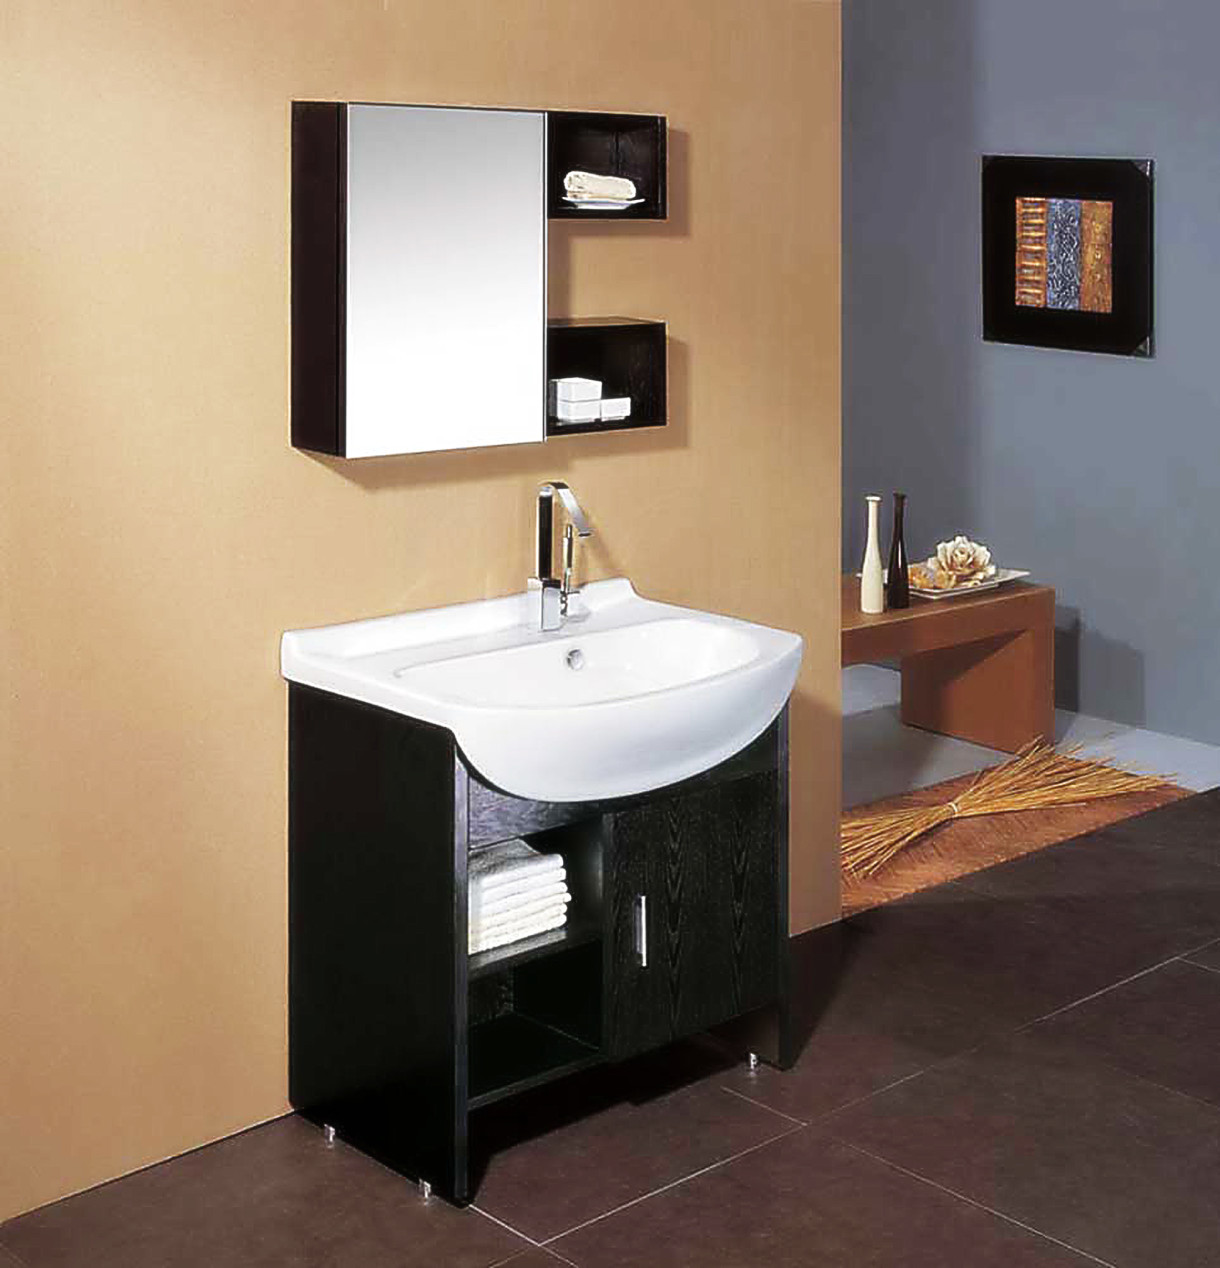 Bathroom Cabinet Stores
 Ikea Bath Cabinet Invades Every Bathroom with Dignity